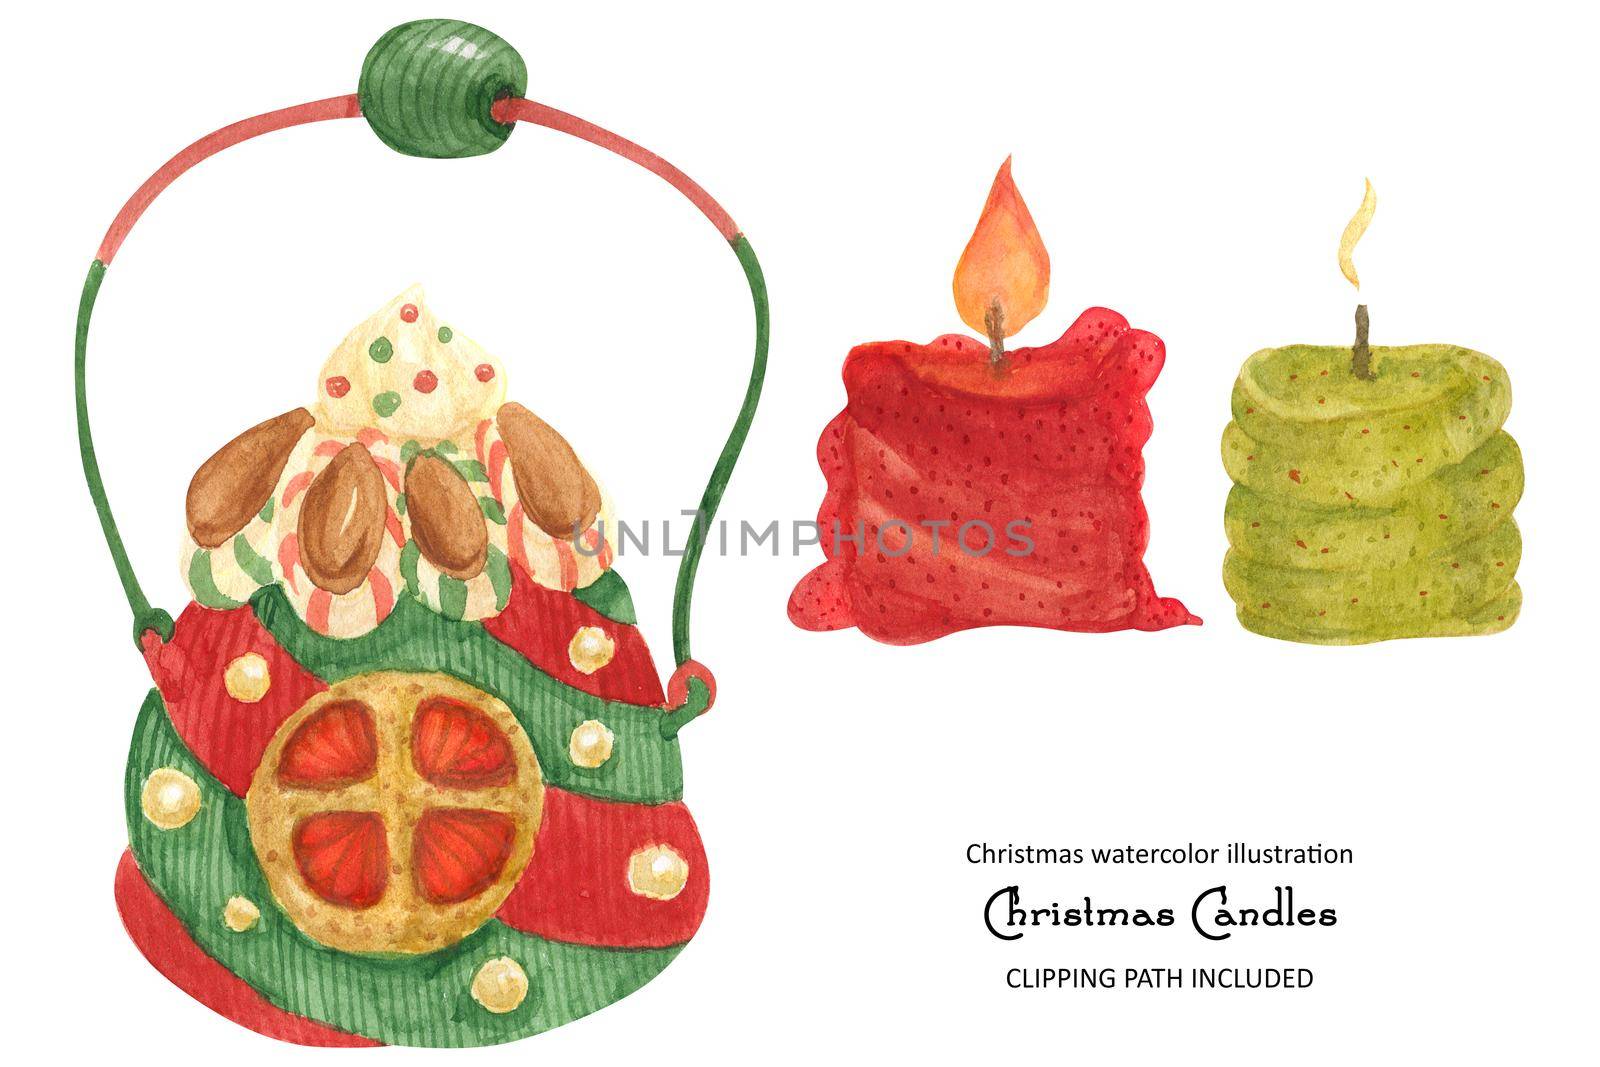 Christmas lamp and candles, watercolor isolated illustration with clipping path